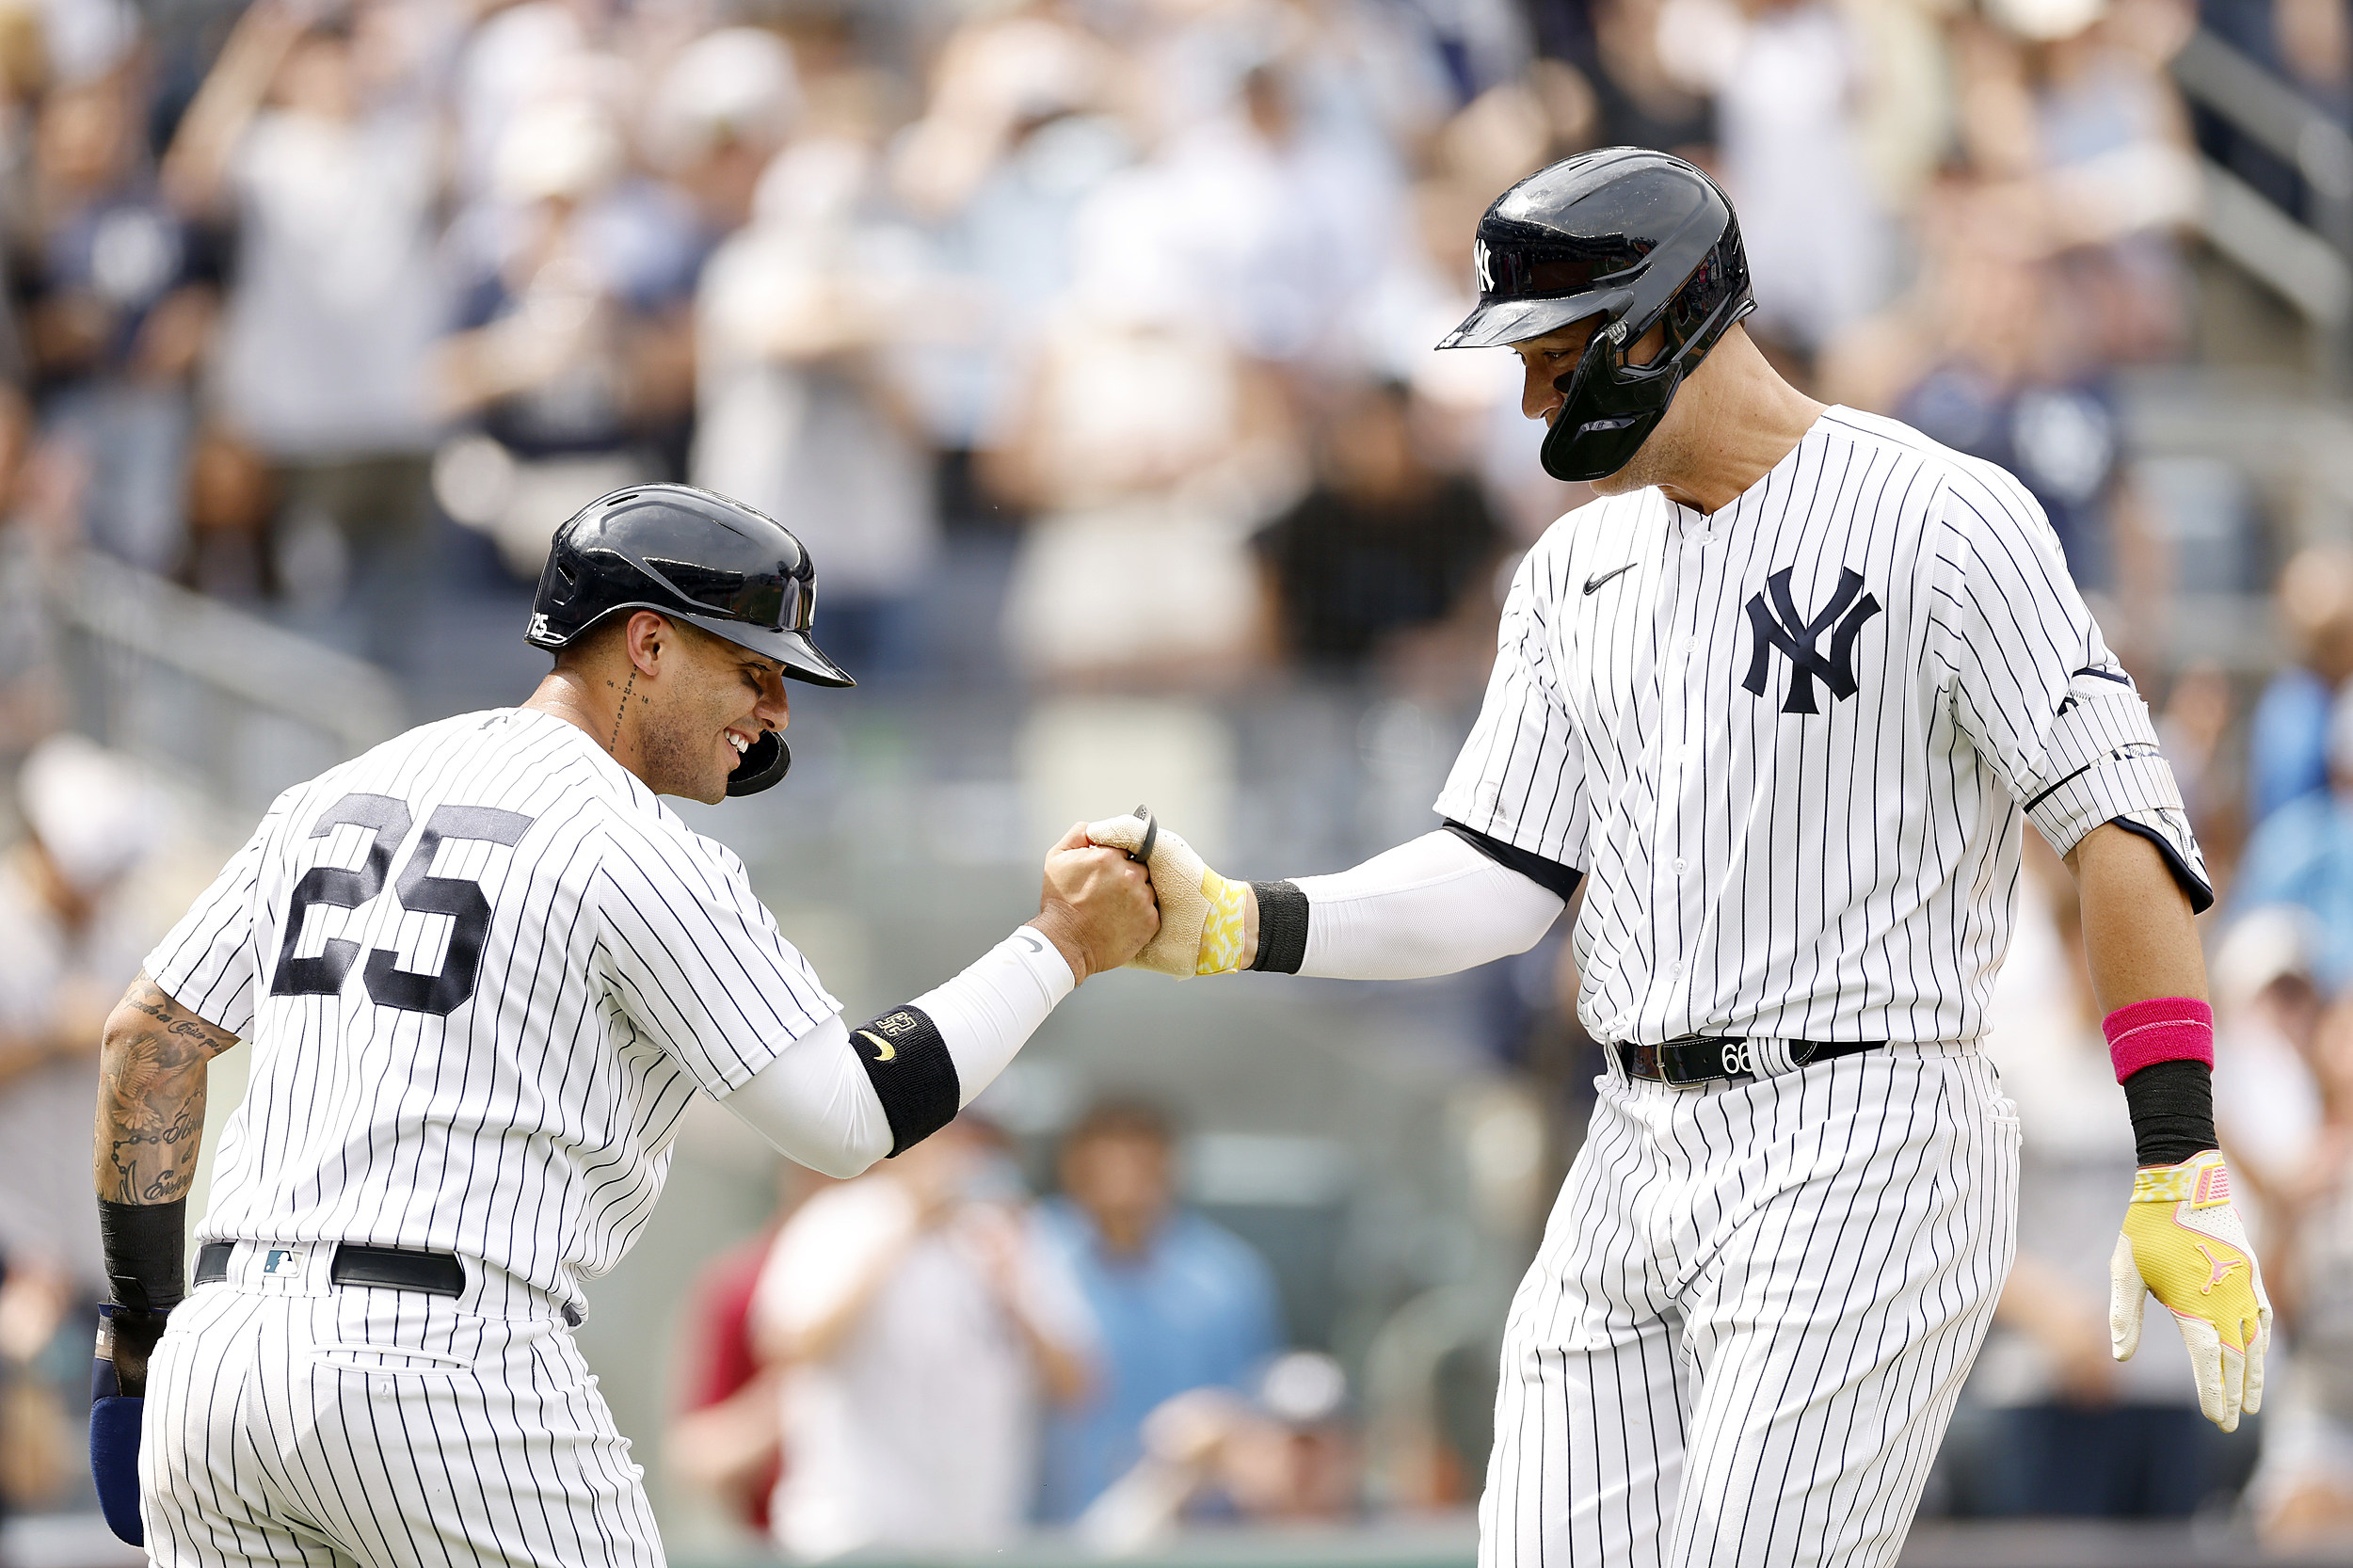 New York Yankee Todd Frazier's path includes strong ties to